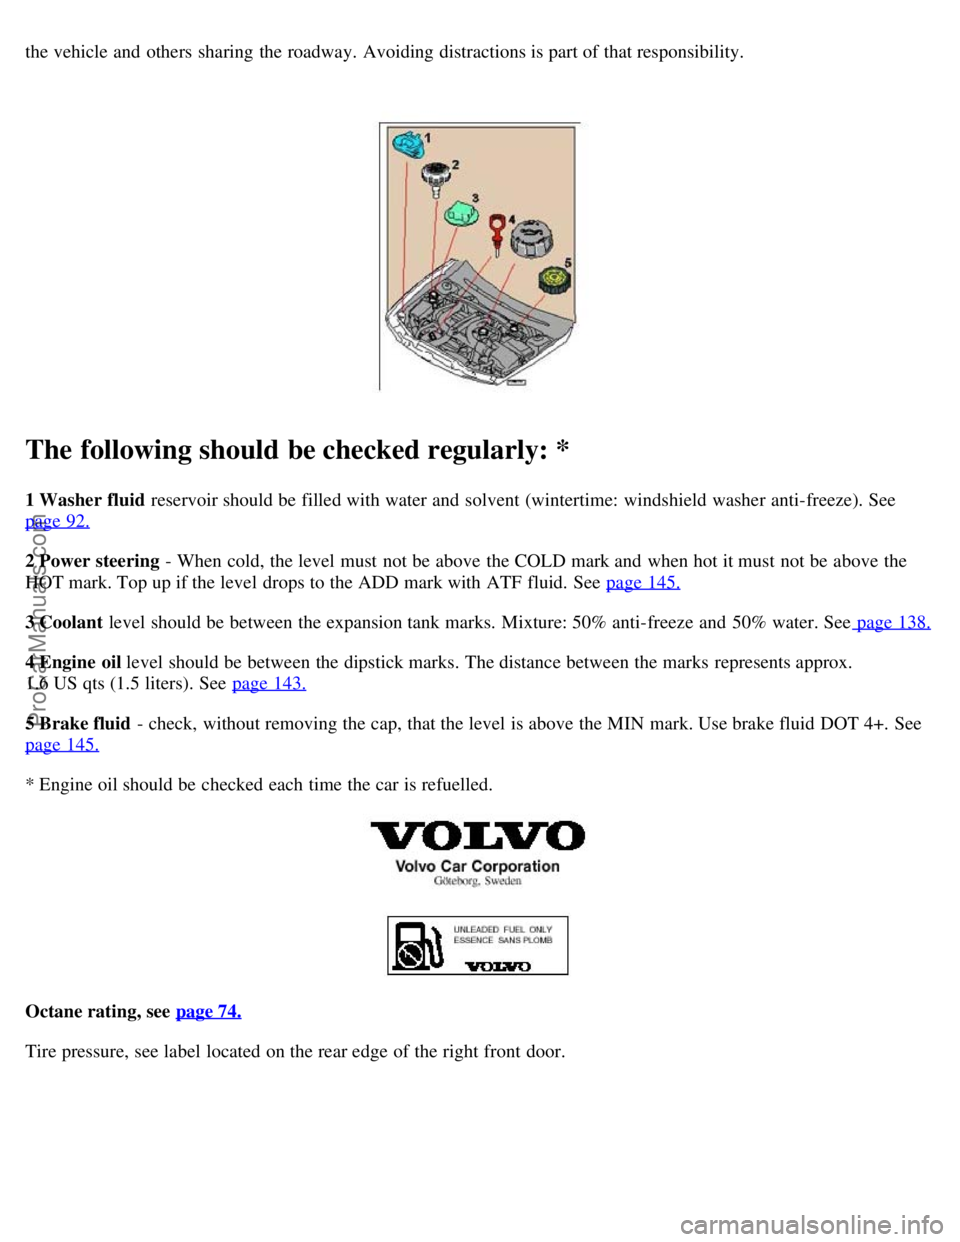 VOLVO S80 2006  Owners Manual the vehicle and  others  sharing  the roadway.  Avoiding distractions is part of that responsibility.  
The following should be checked regularly: *
1 Washer fluid  reservoir should be  filled with wa